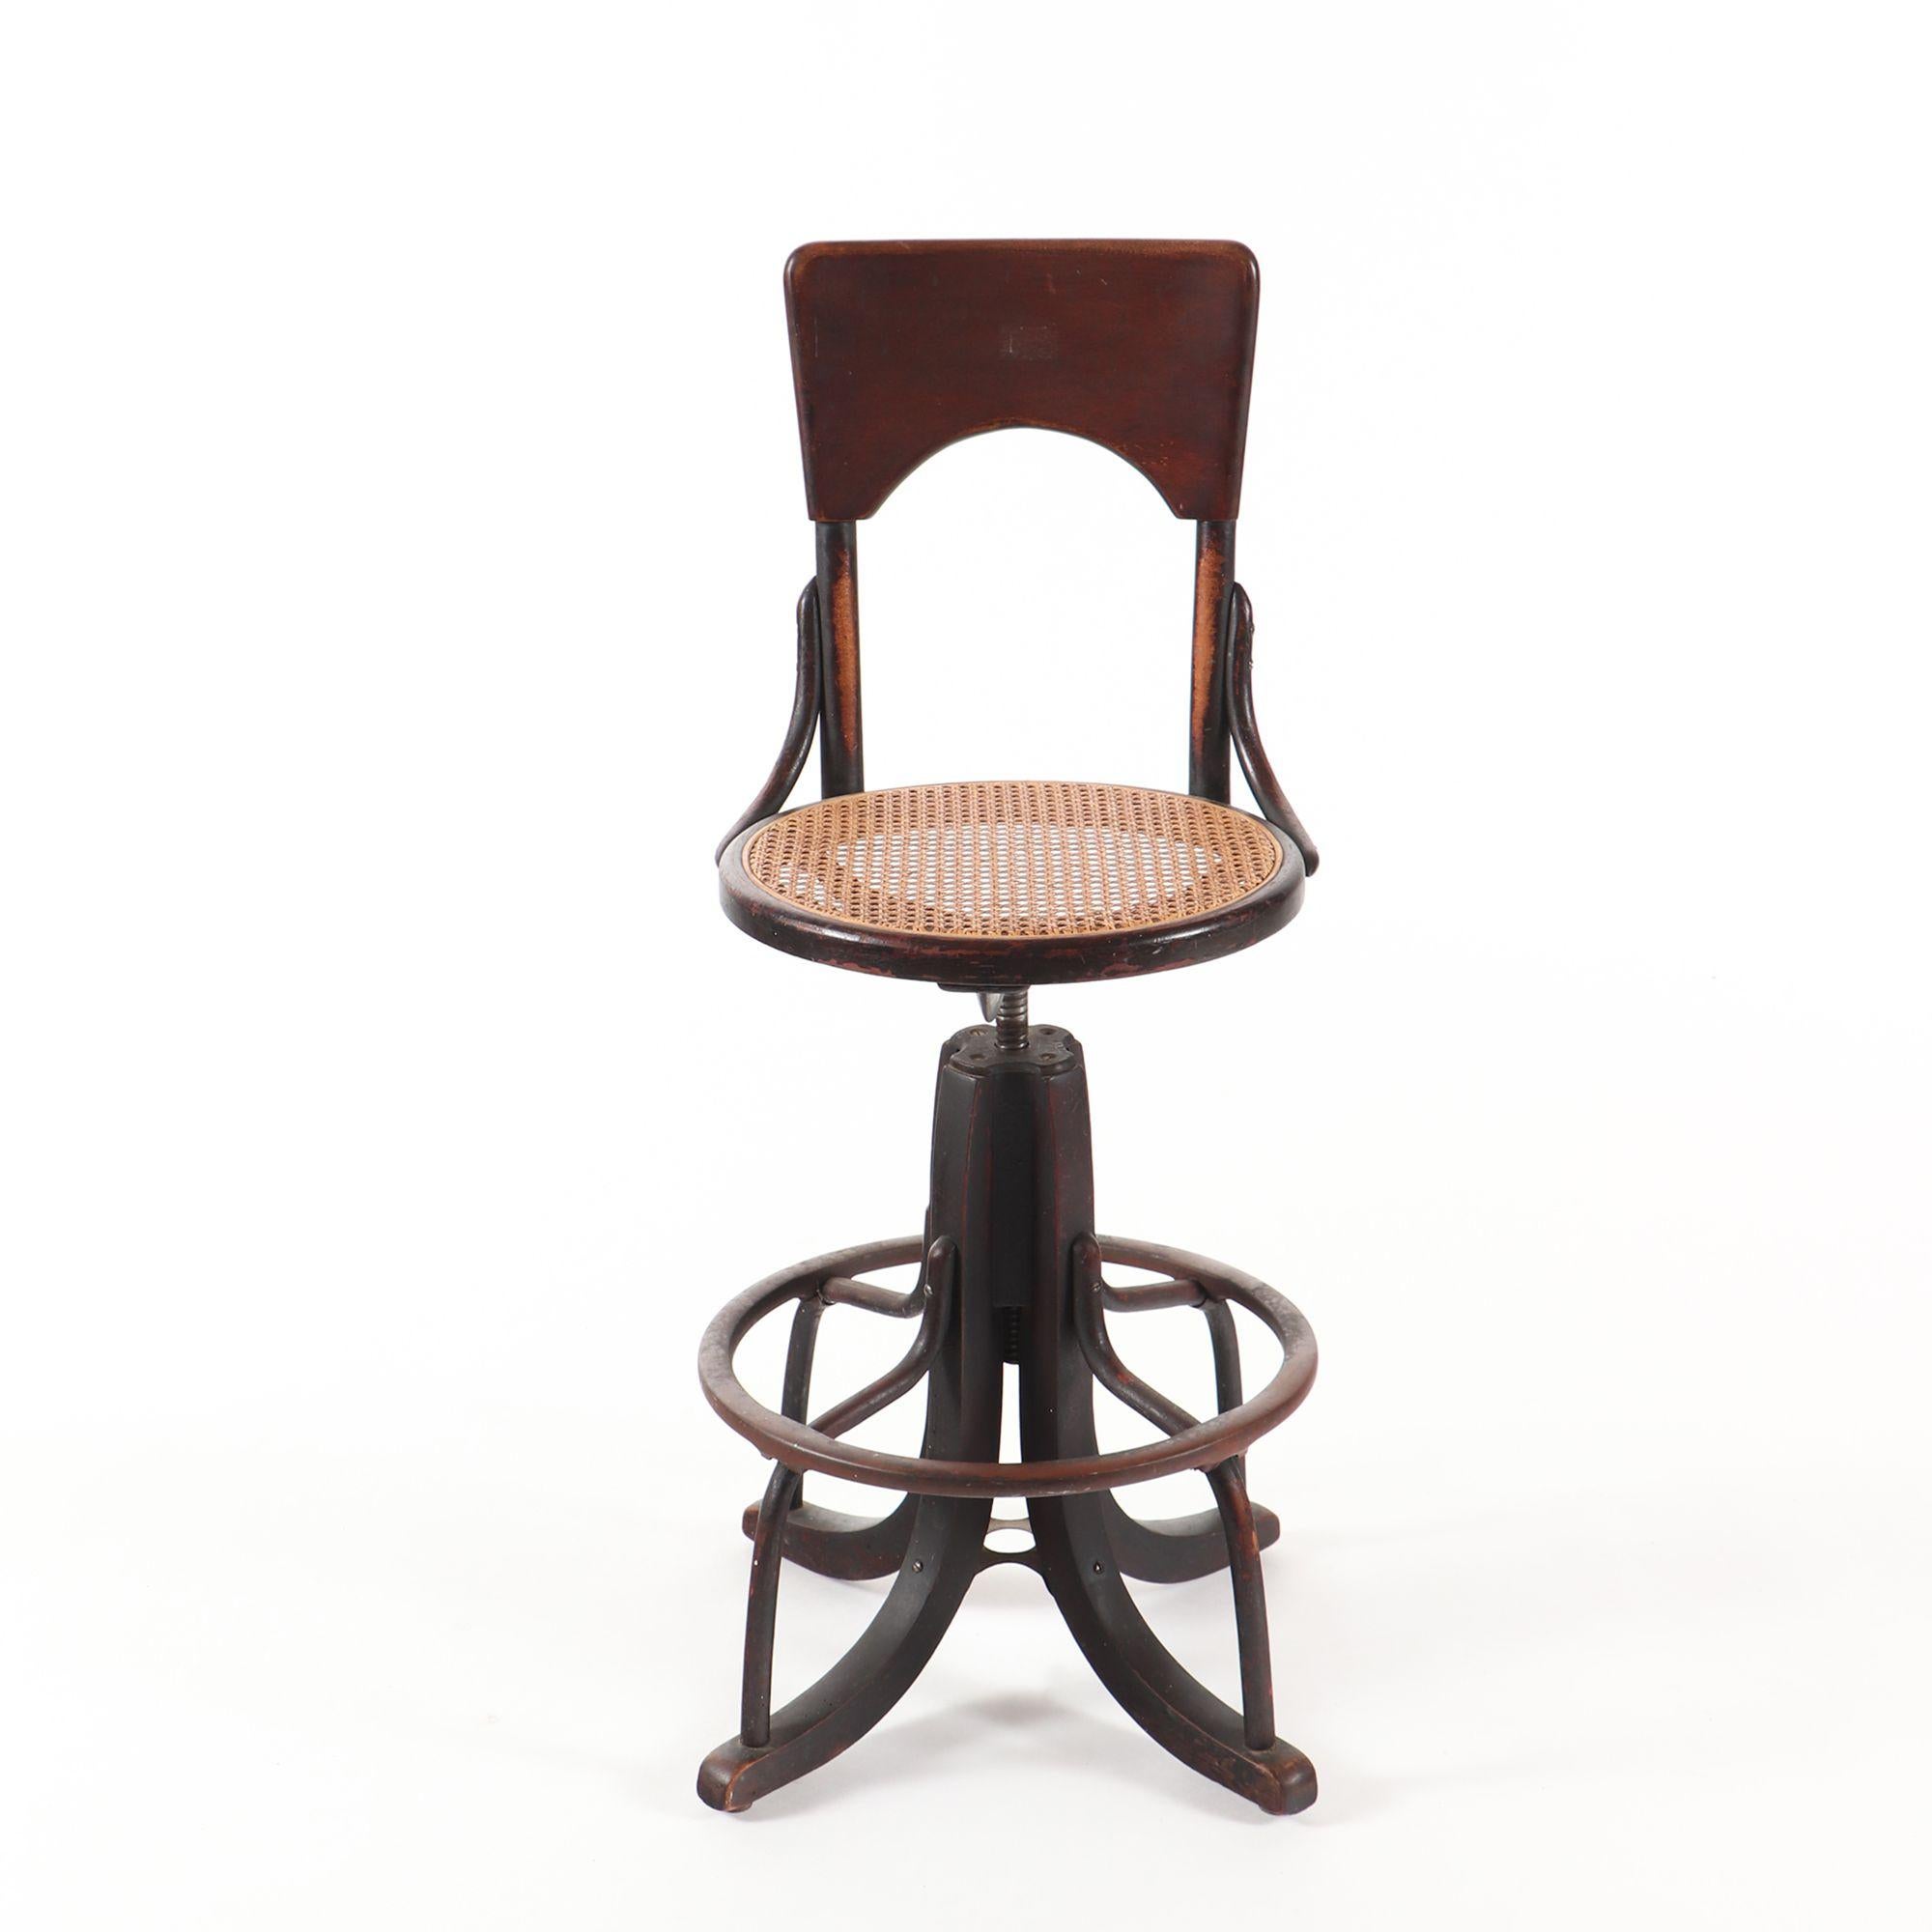 An Industrial swivel stool or telephone operator's chair, circa 1930.
Having a tall wood back with cane seat, resting on downswept legs with circular foot rest.